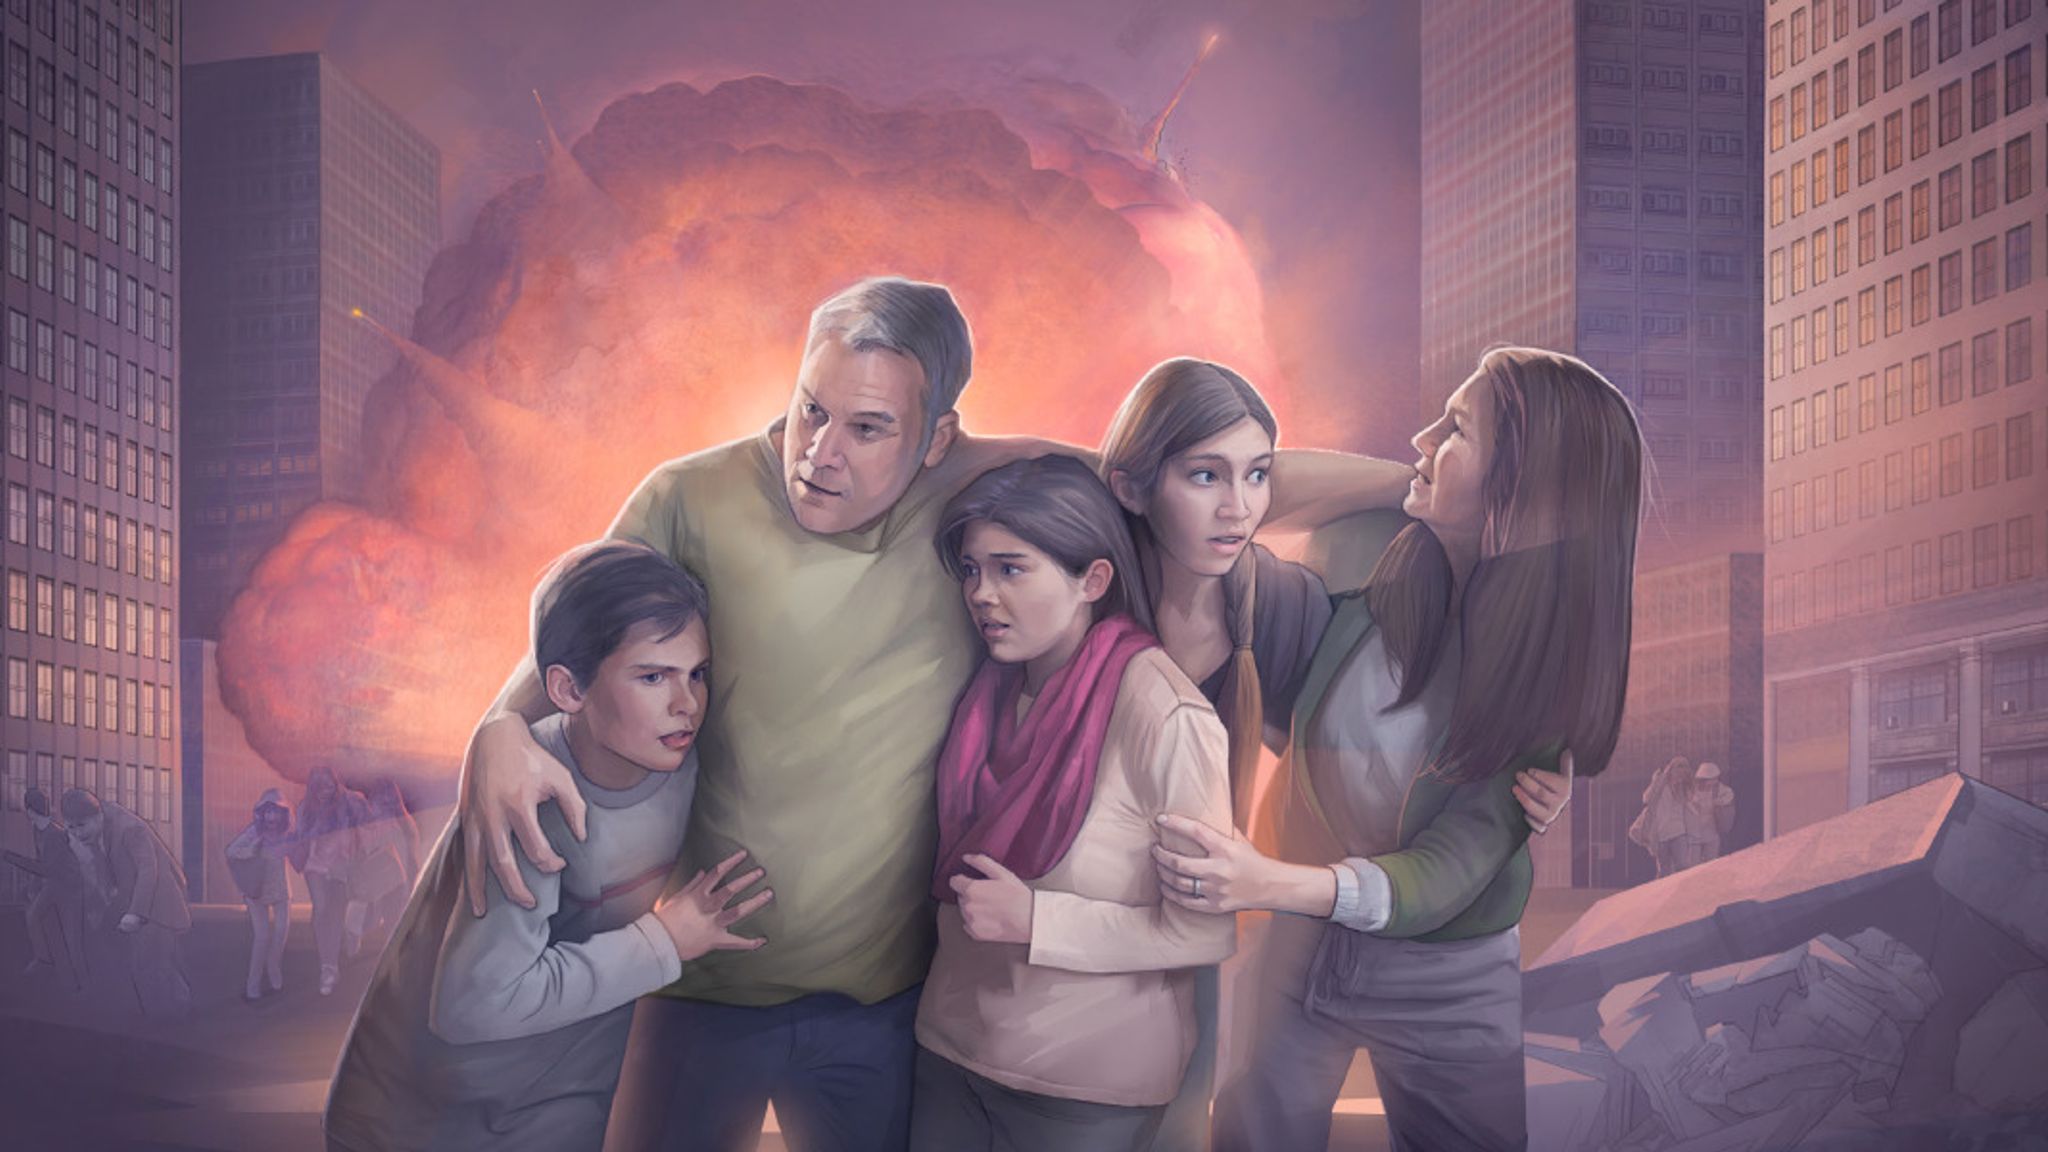 Armageddon, according to Jehovah's Witnesses. 